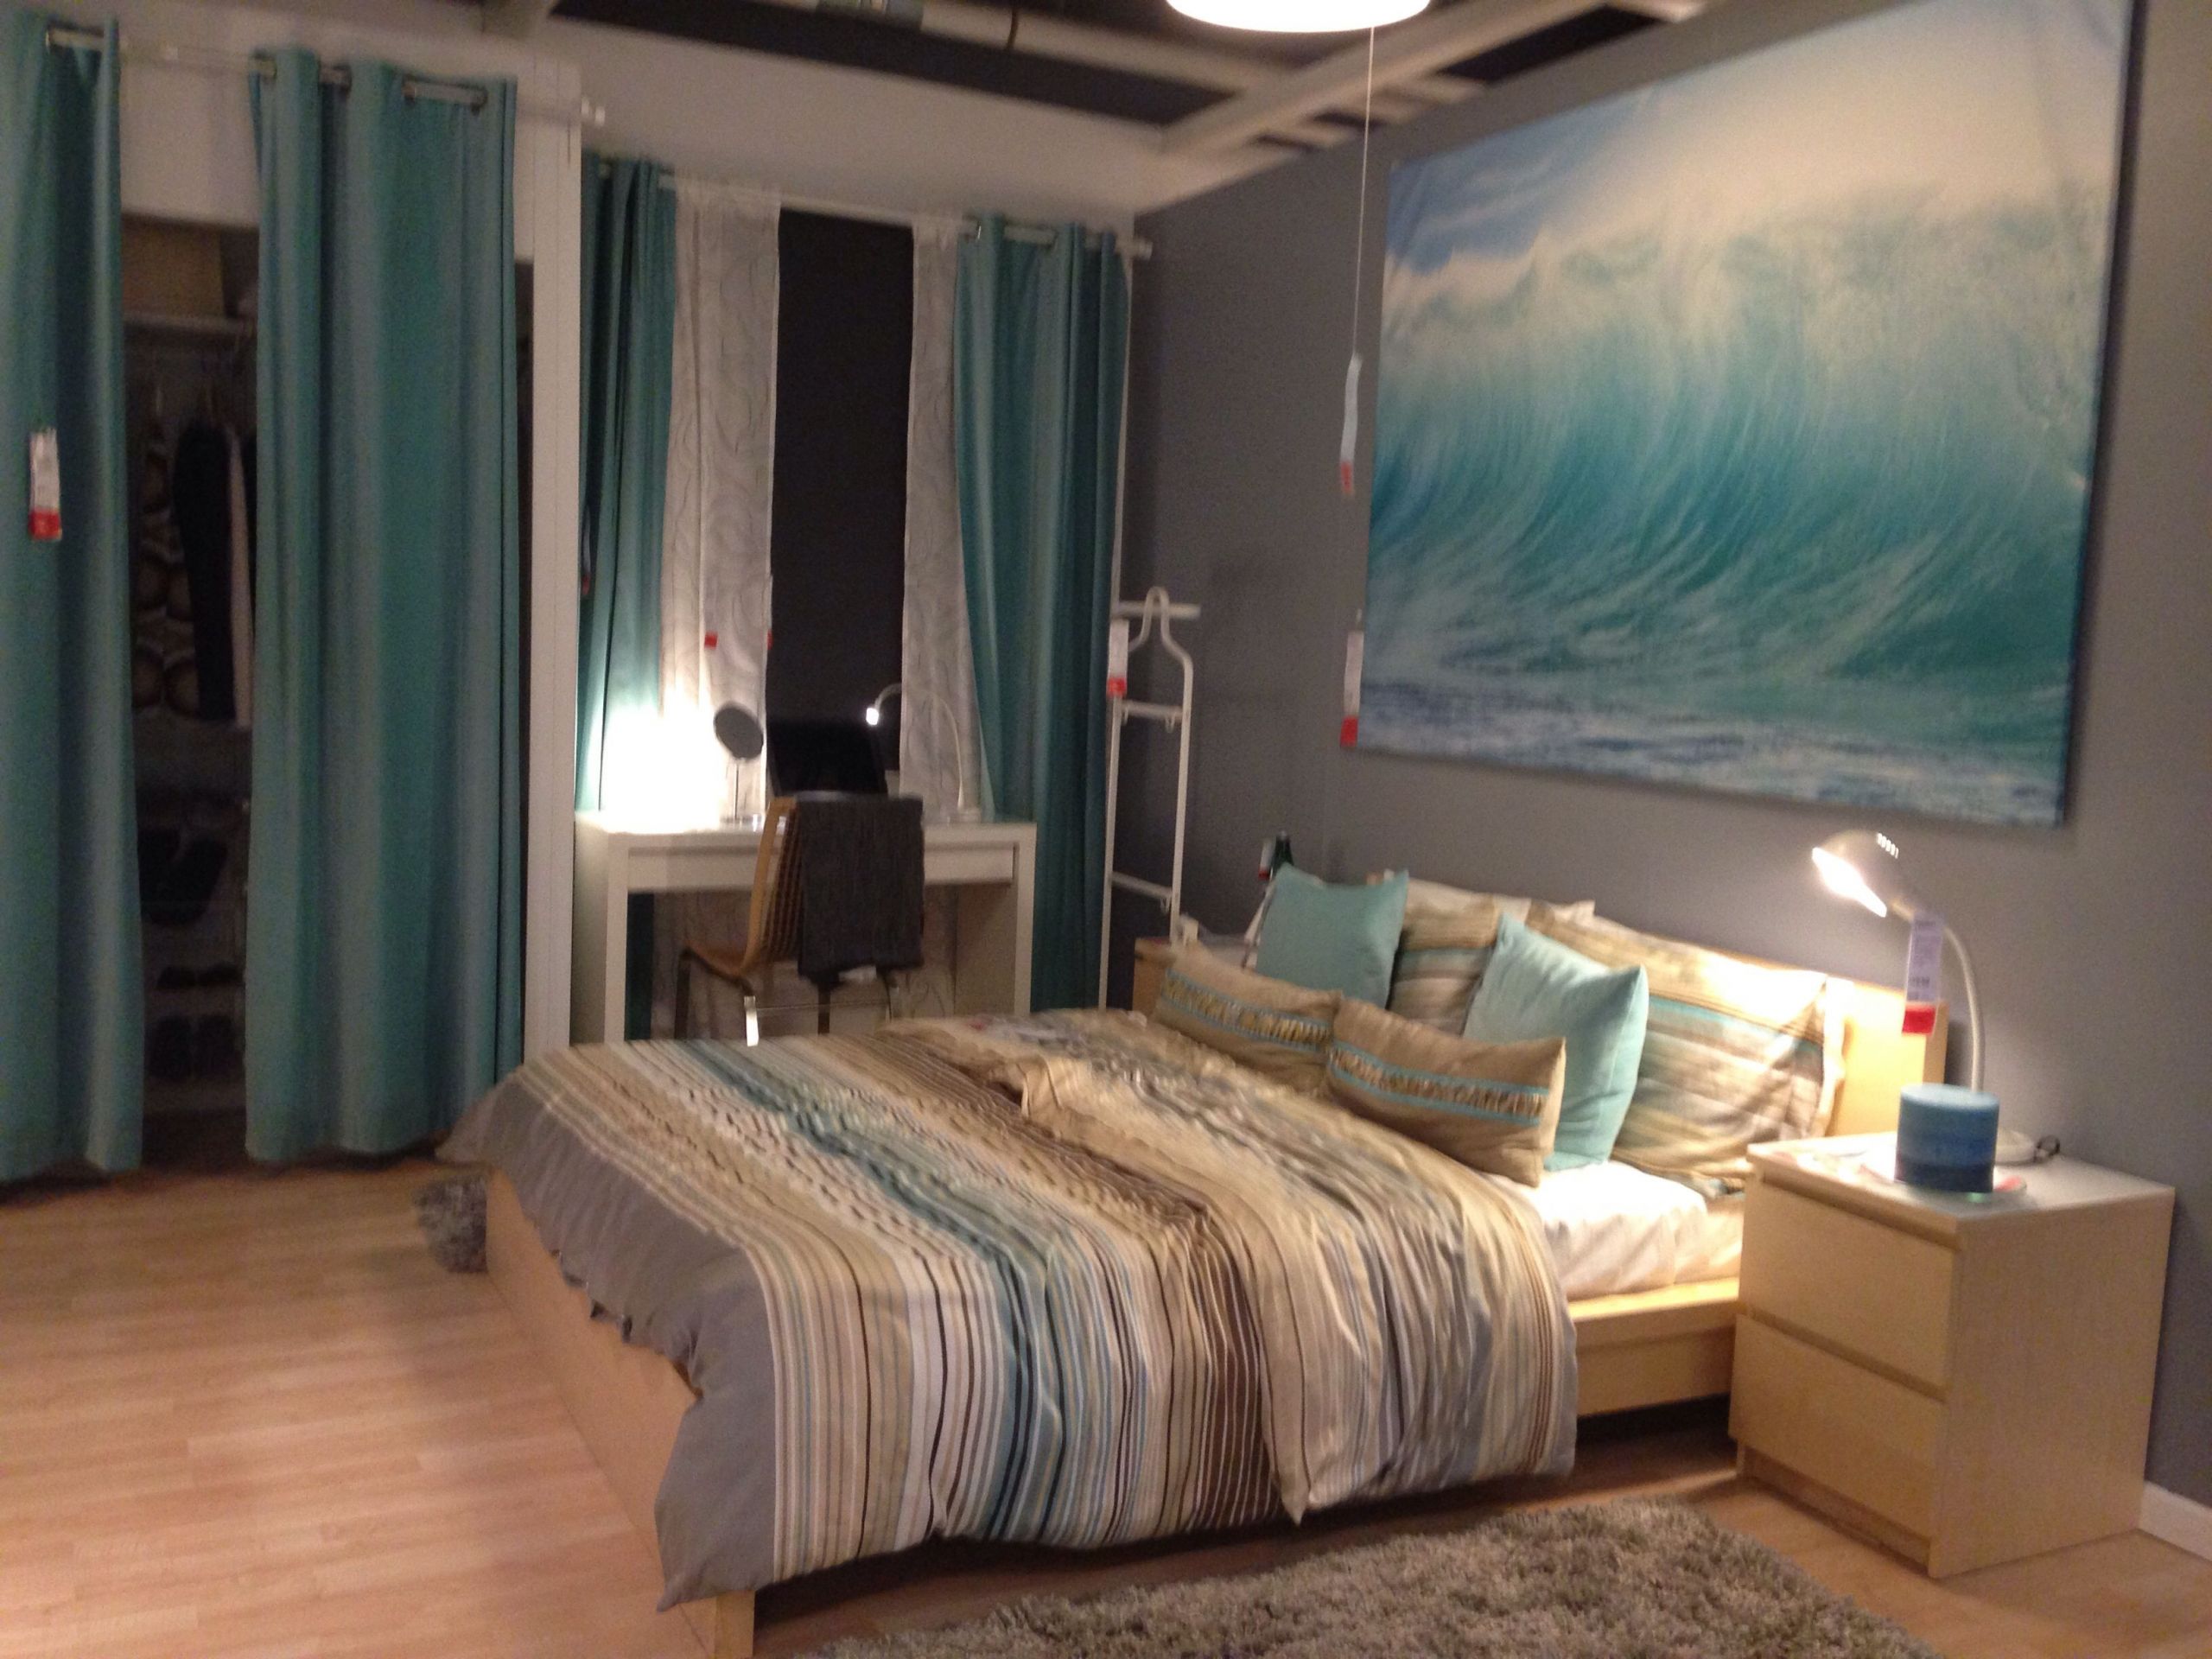 Ocean Bedroom Decorations
 Beach themed bedroom Everything is sold at IKEA Love it